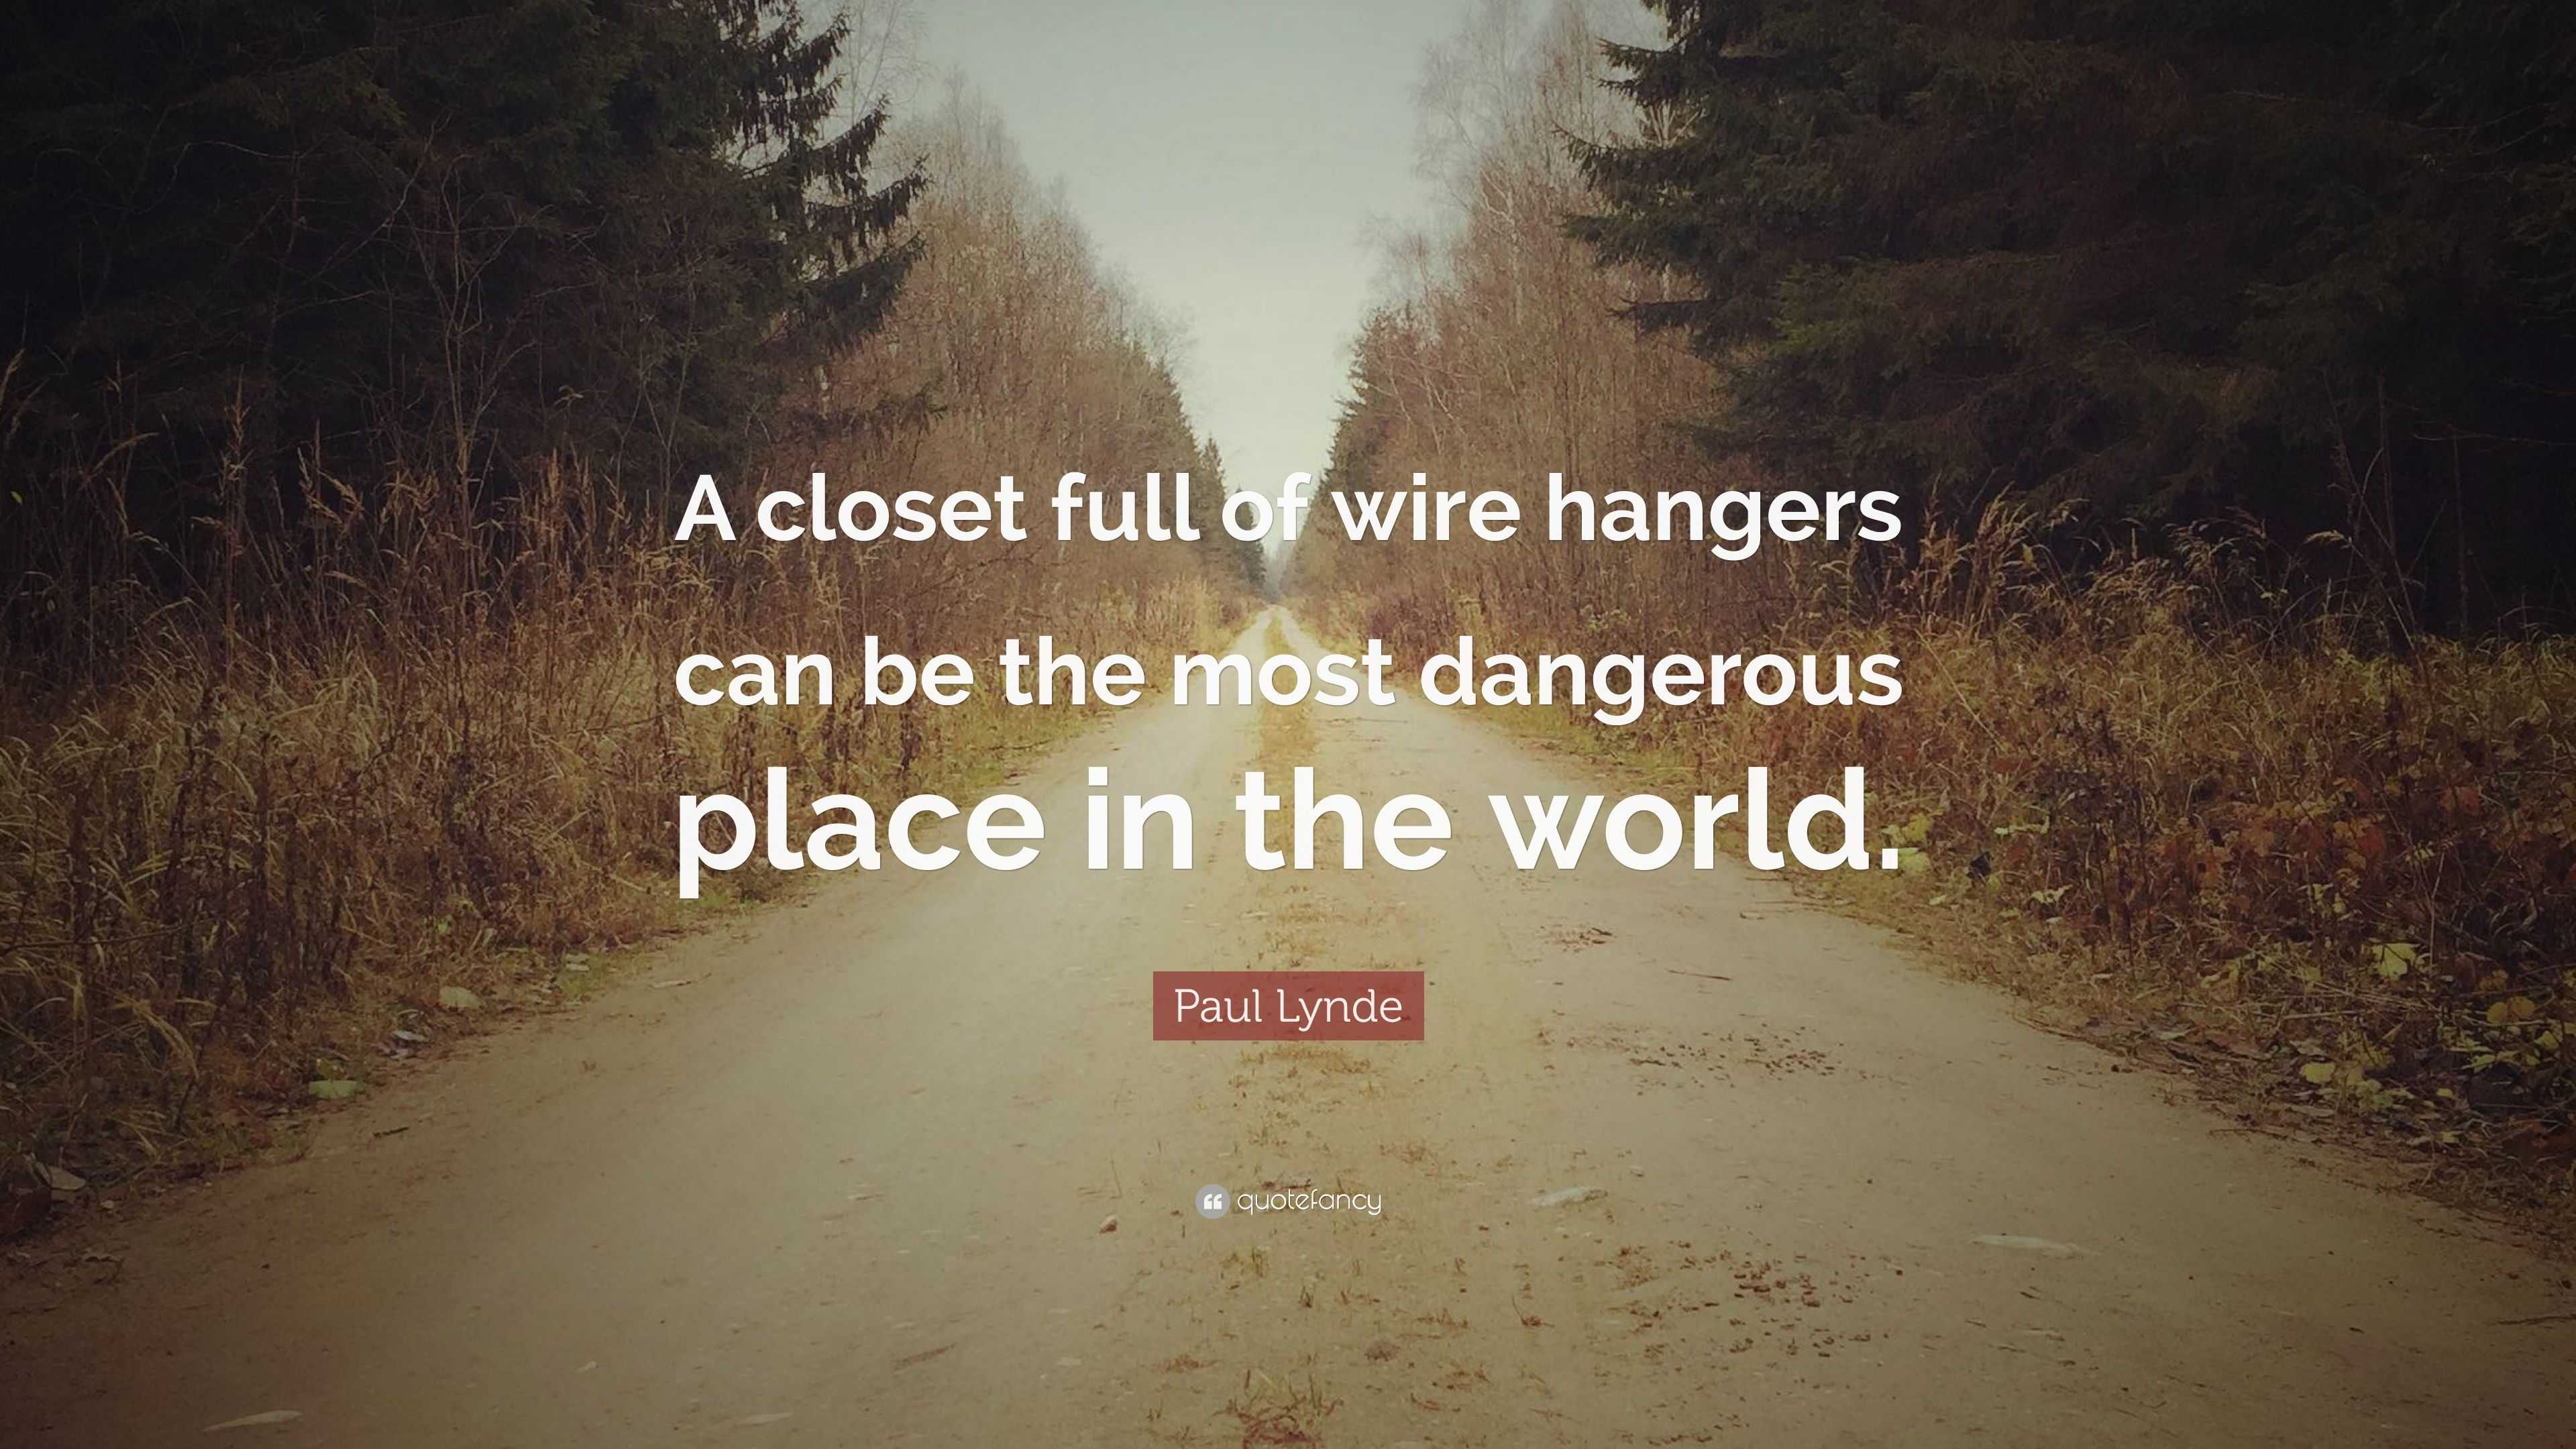 Paul Lynde Quote: "A closet full of wire hangers can be ...